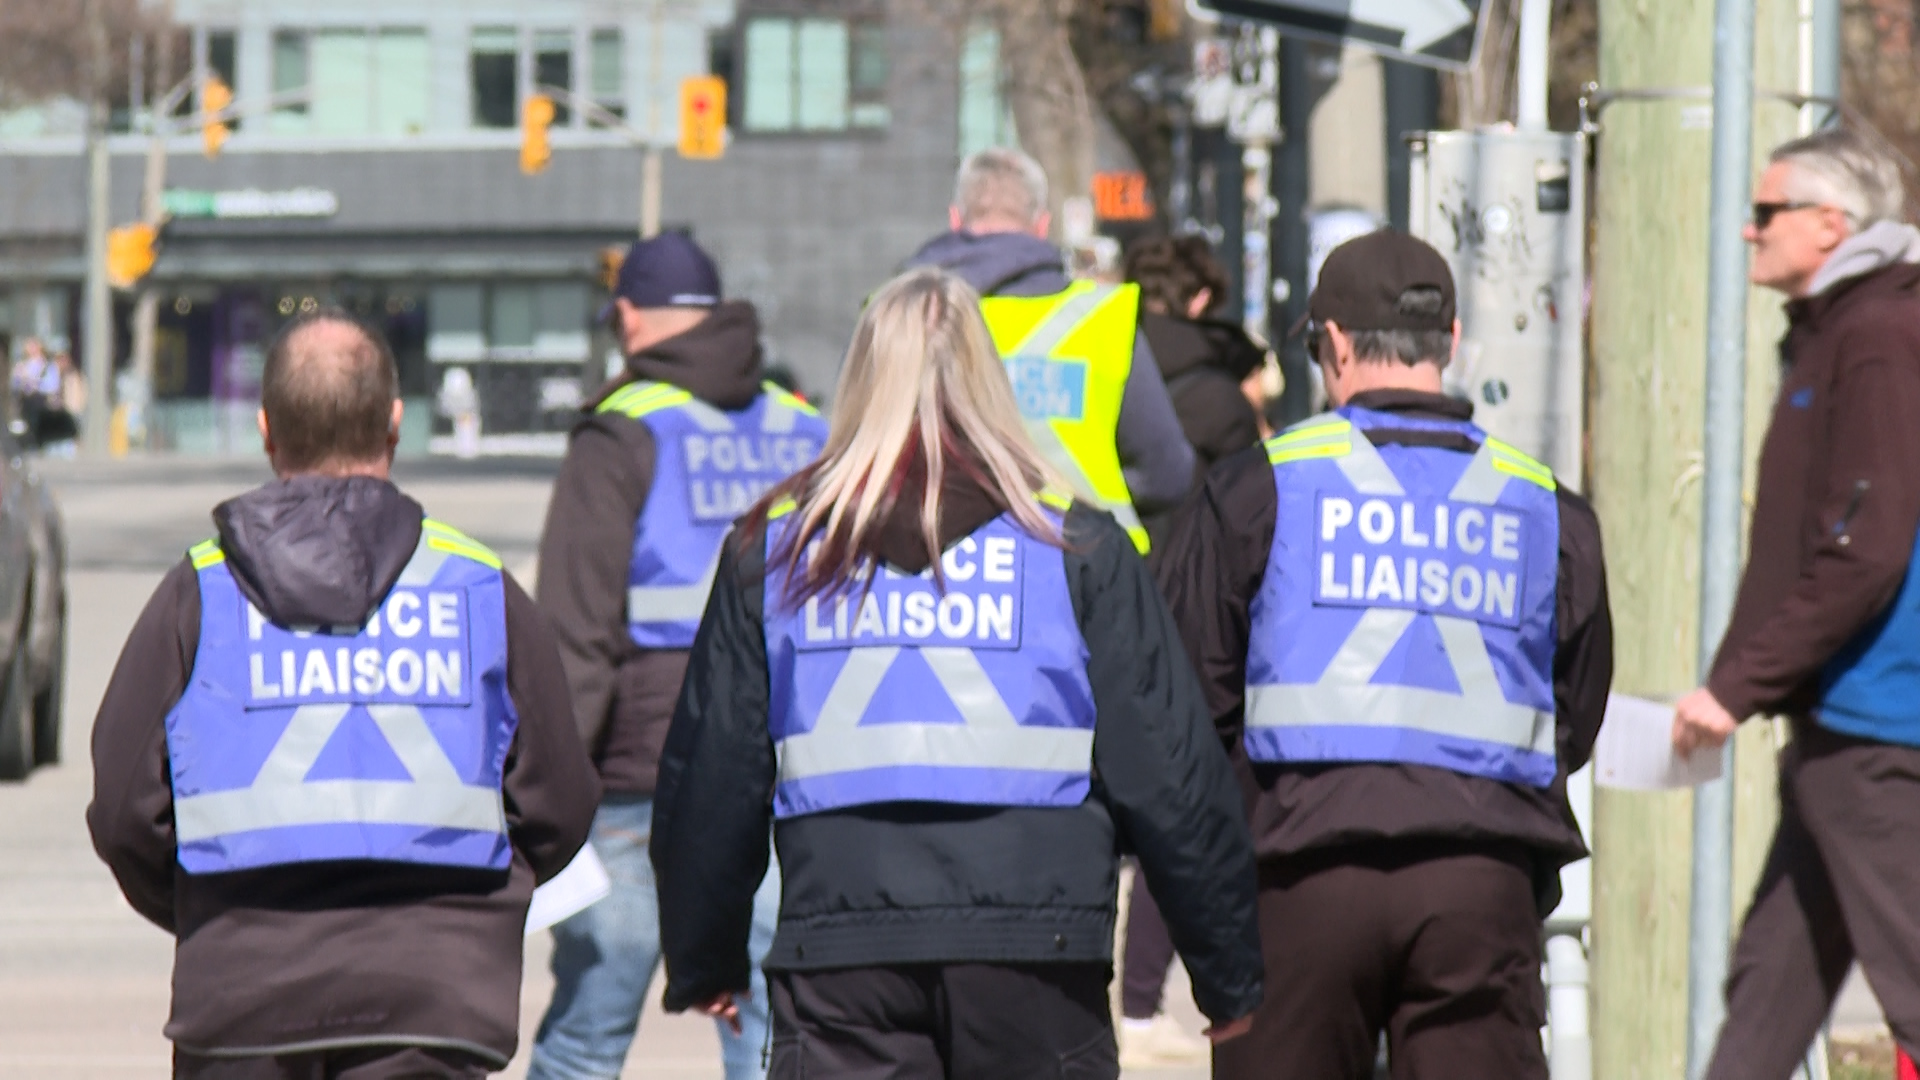 Police, bylaw preparing for St. Patrick’s Day weekend in Kingston, Ont.